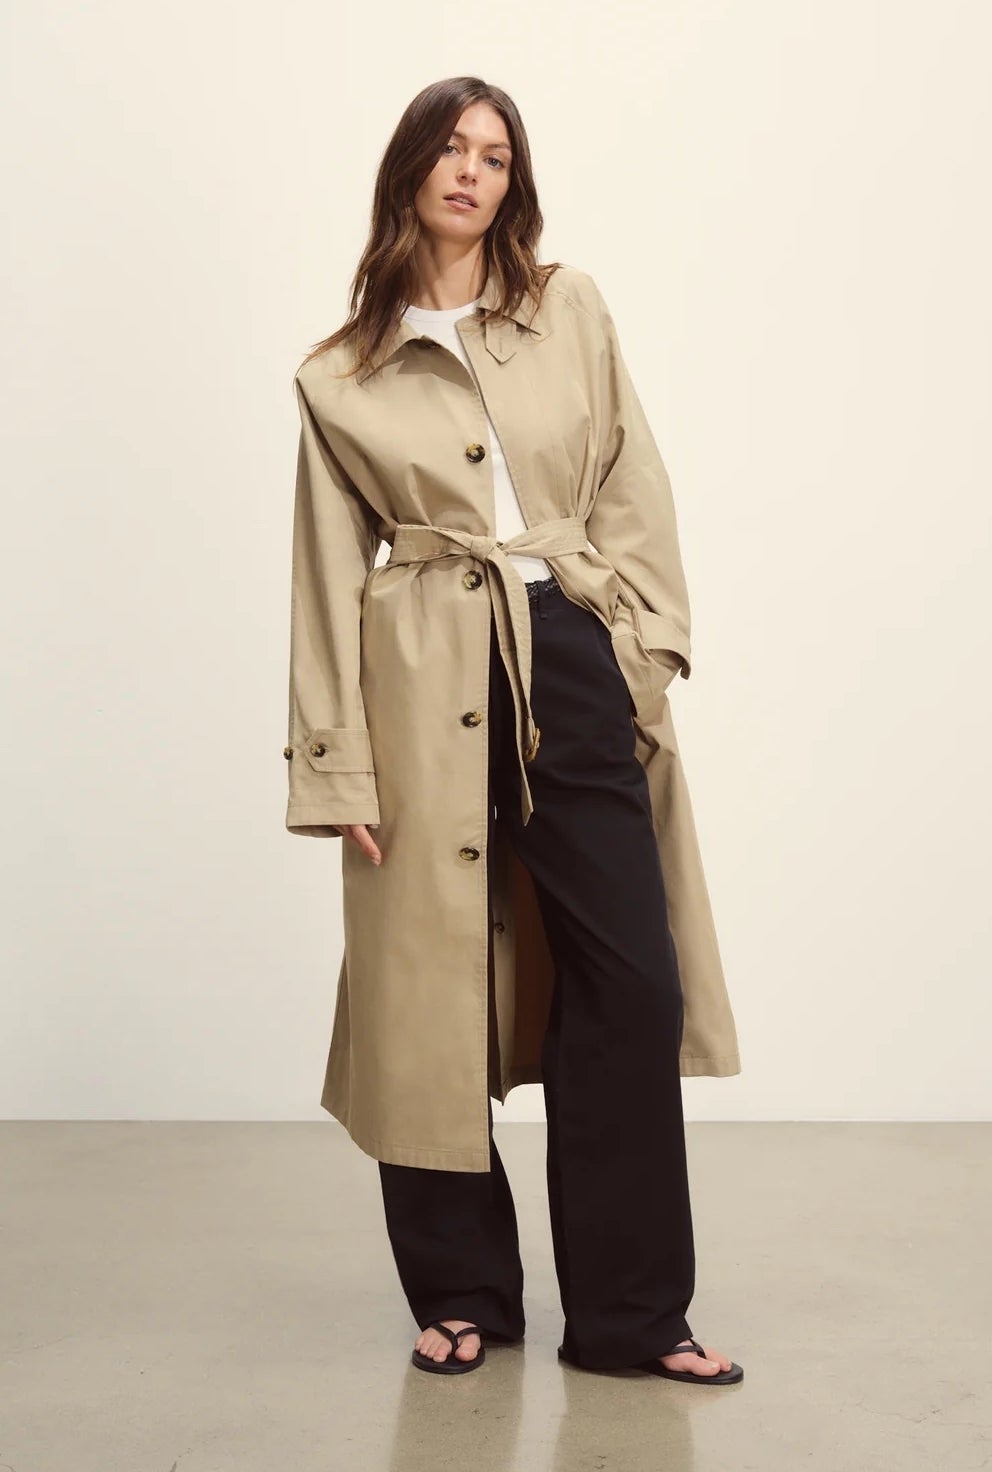 Model in a trench coat